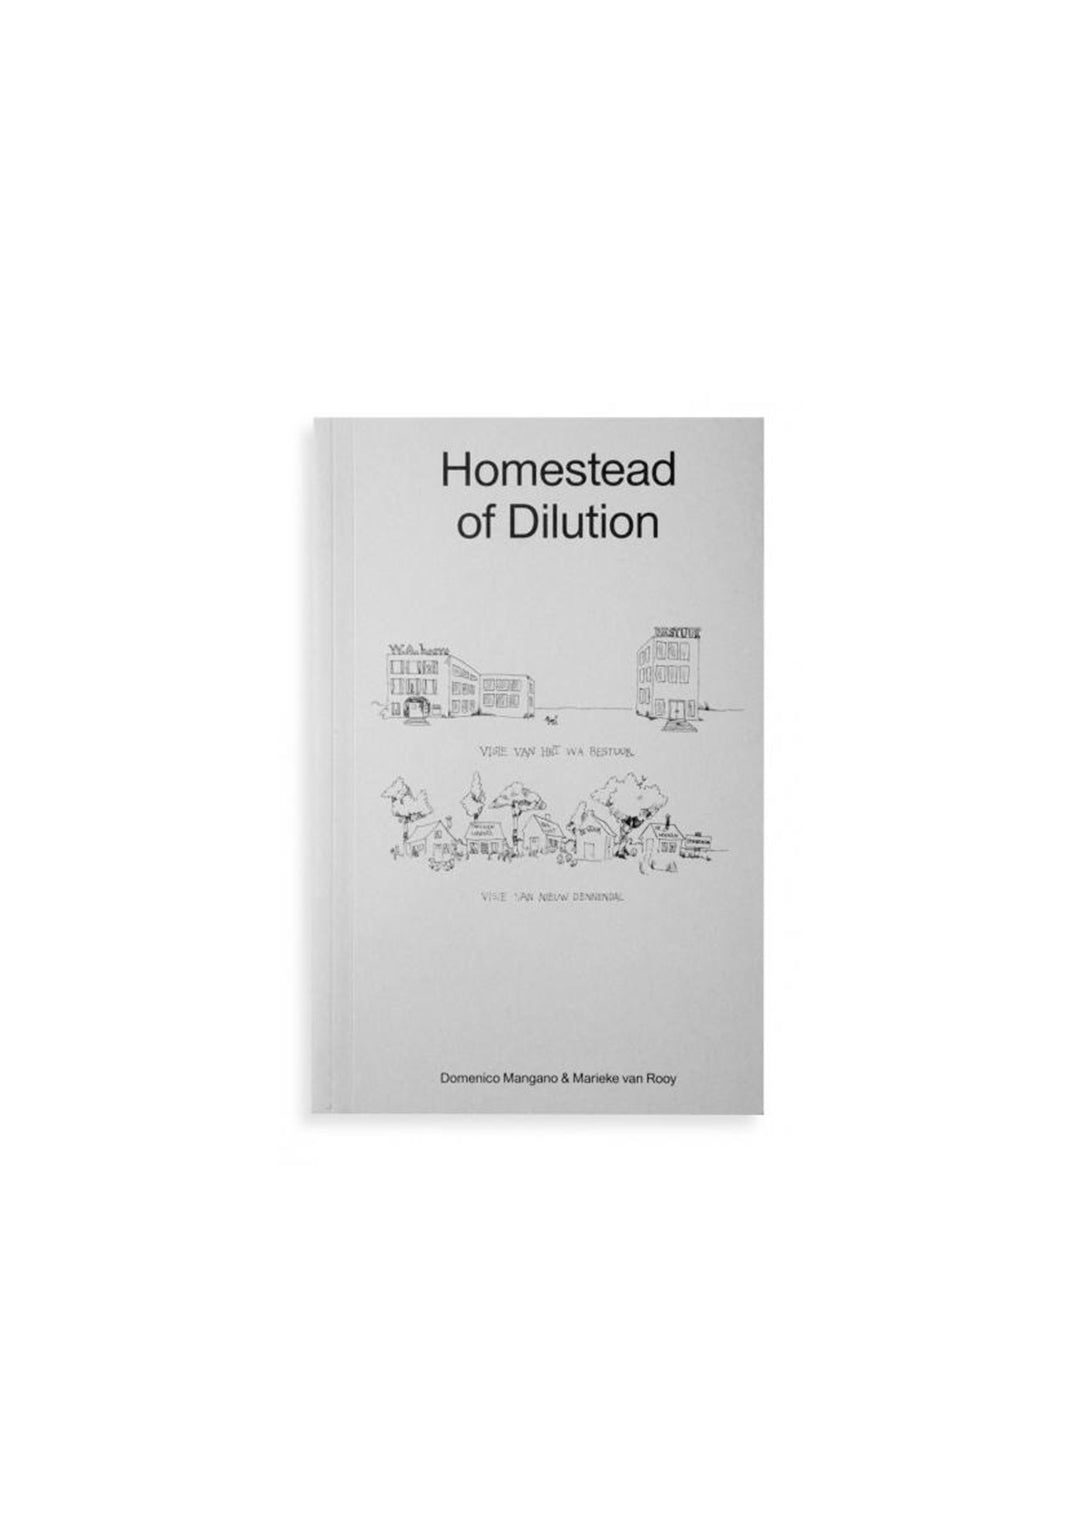 Homestead of Dilution